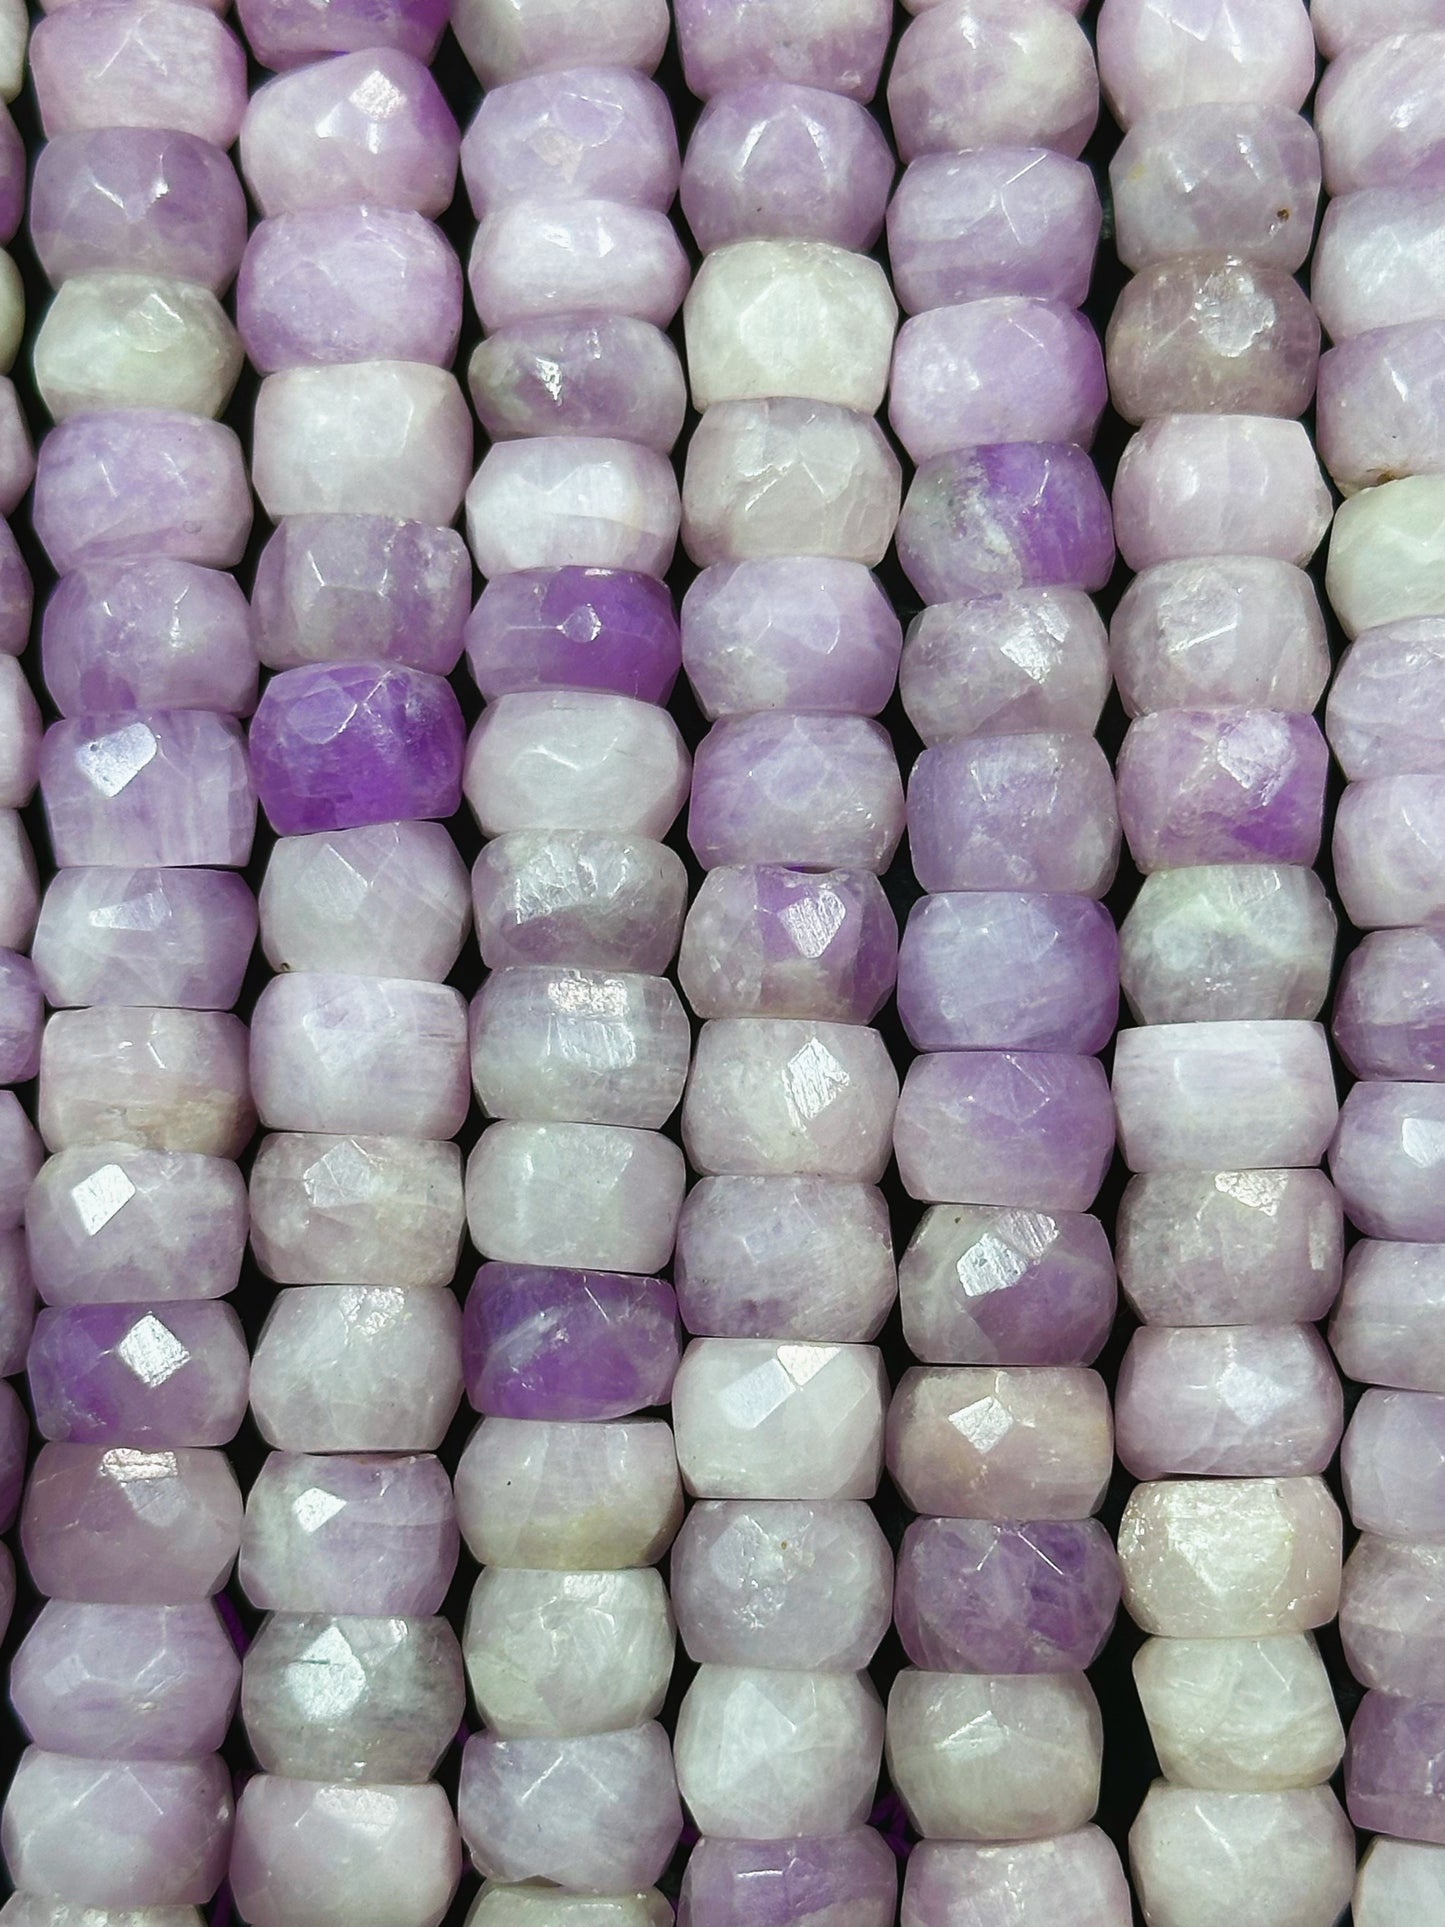 AAA Natural Kunzite Gemstone Bead Faceted 9x6mm Rondelle Shape, Gorgeous Natural Pink Purple Color Kunzite, Excellent Quality 15.5" Strand